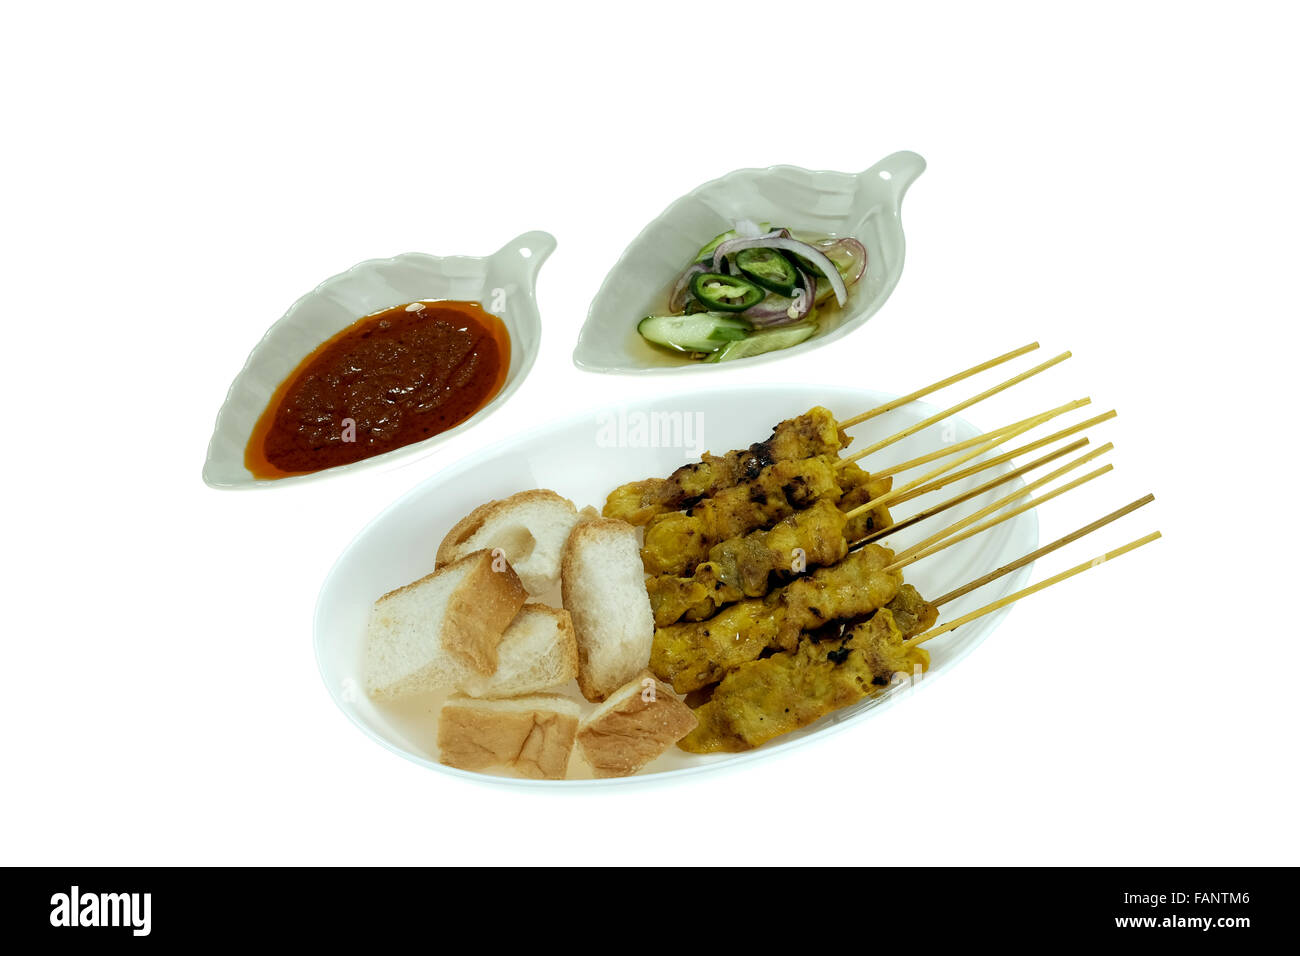 Grilled marinated pork satay with sweet and sour sauce and peanut sauce, isolated on white background Stock Photo